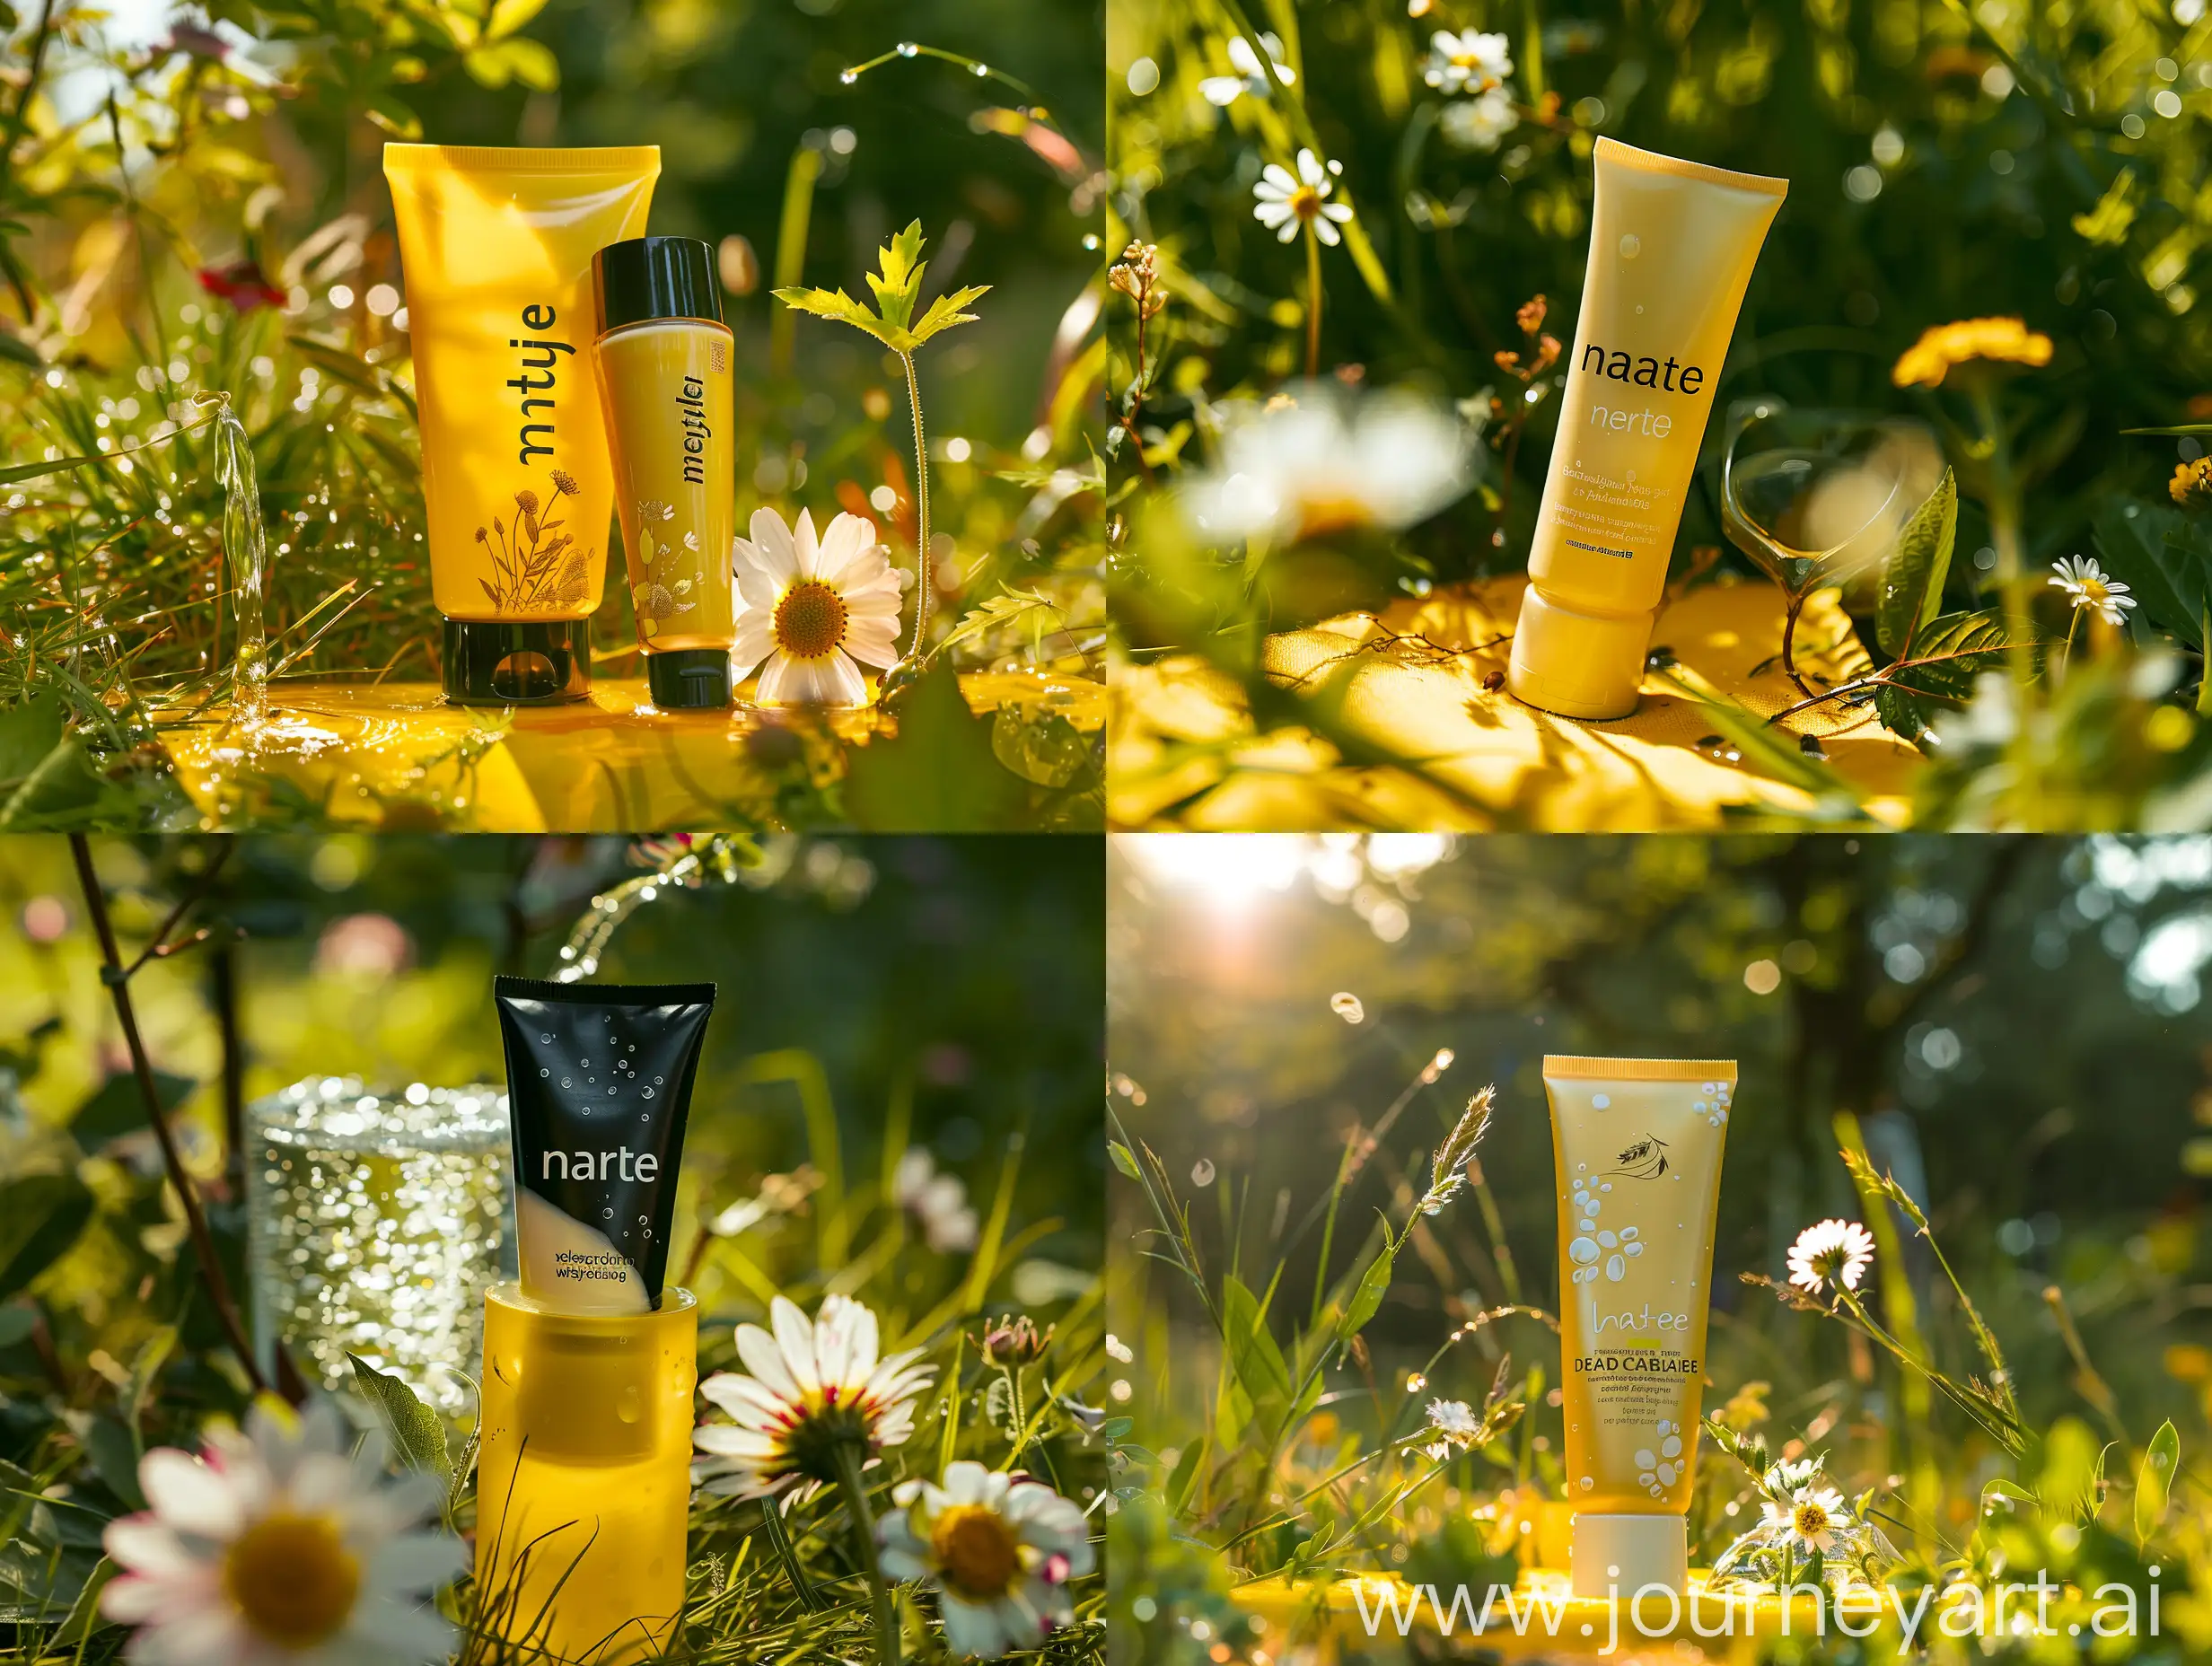 product photography, tube of face cream with brand text "nature" positioned on the yellow low stage in meadown, sun light, flowers, sparkling water